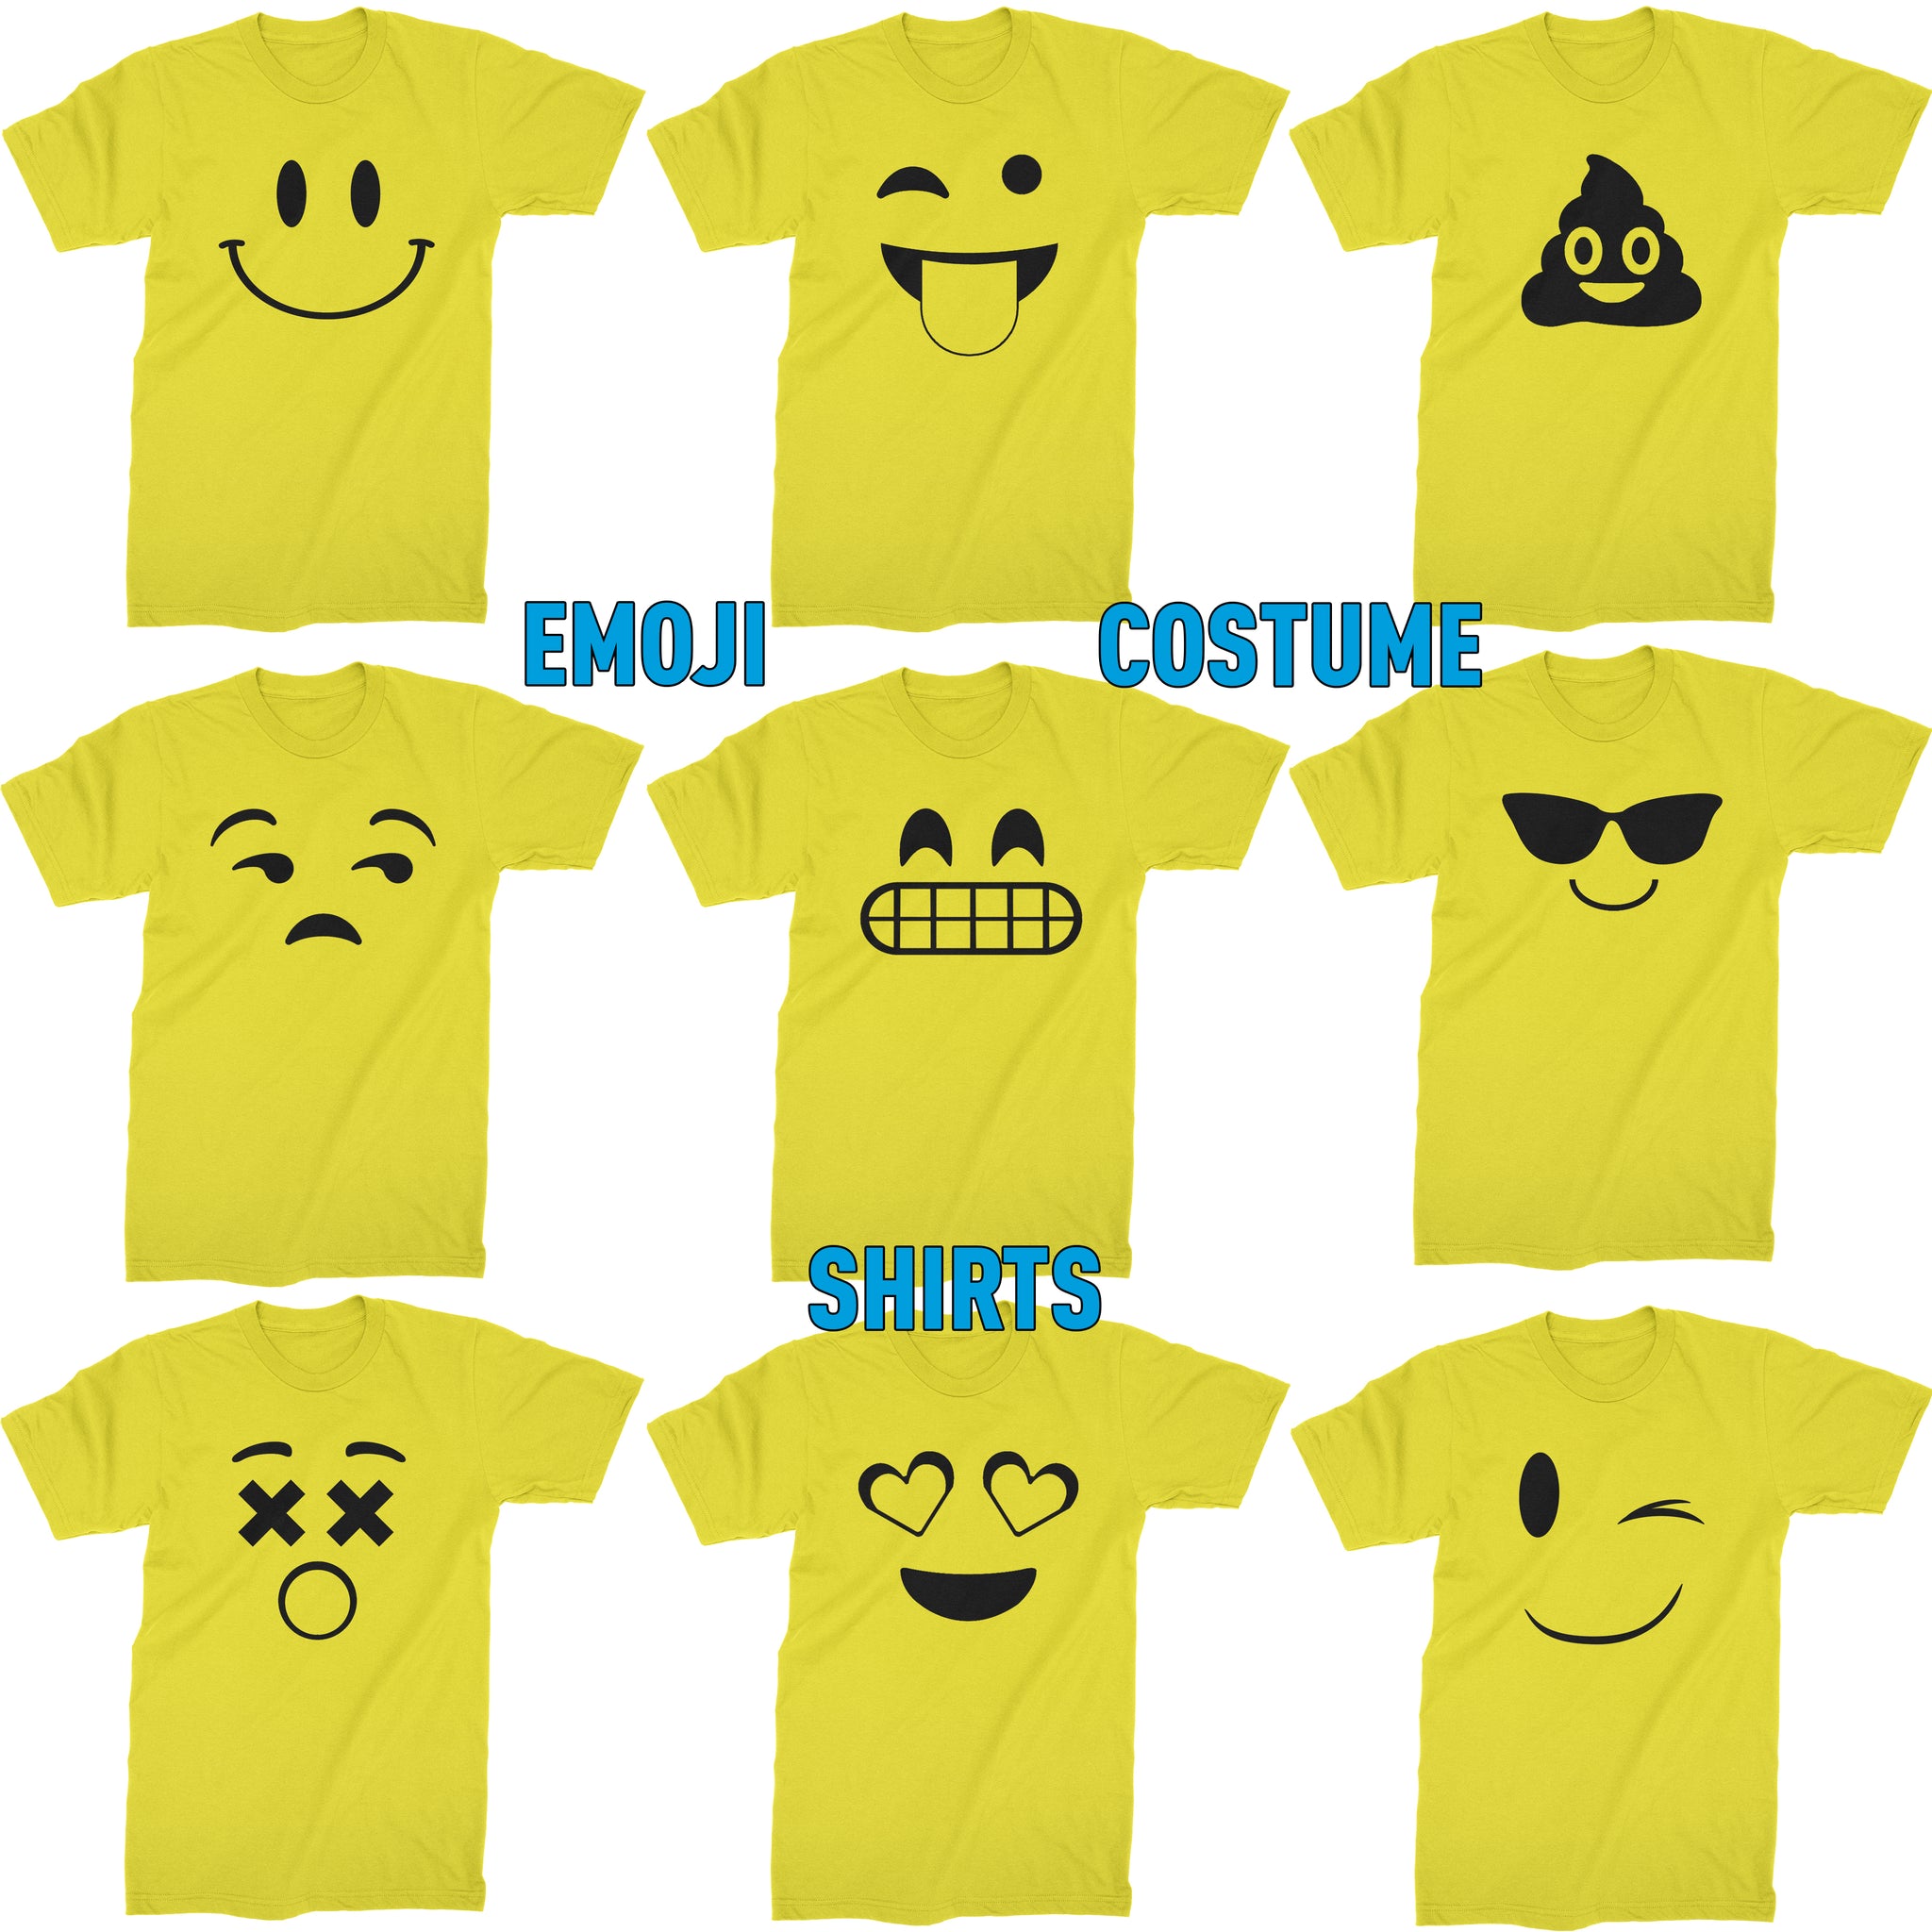 Awesome Face Funny Meme Smiley Emoticon | Kids T-Shirt